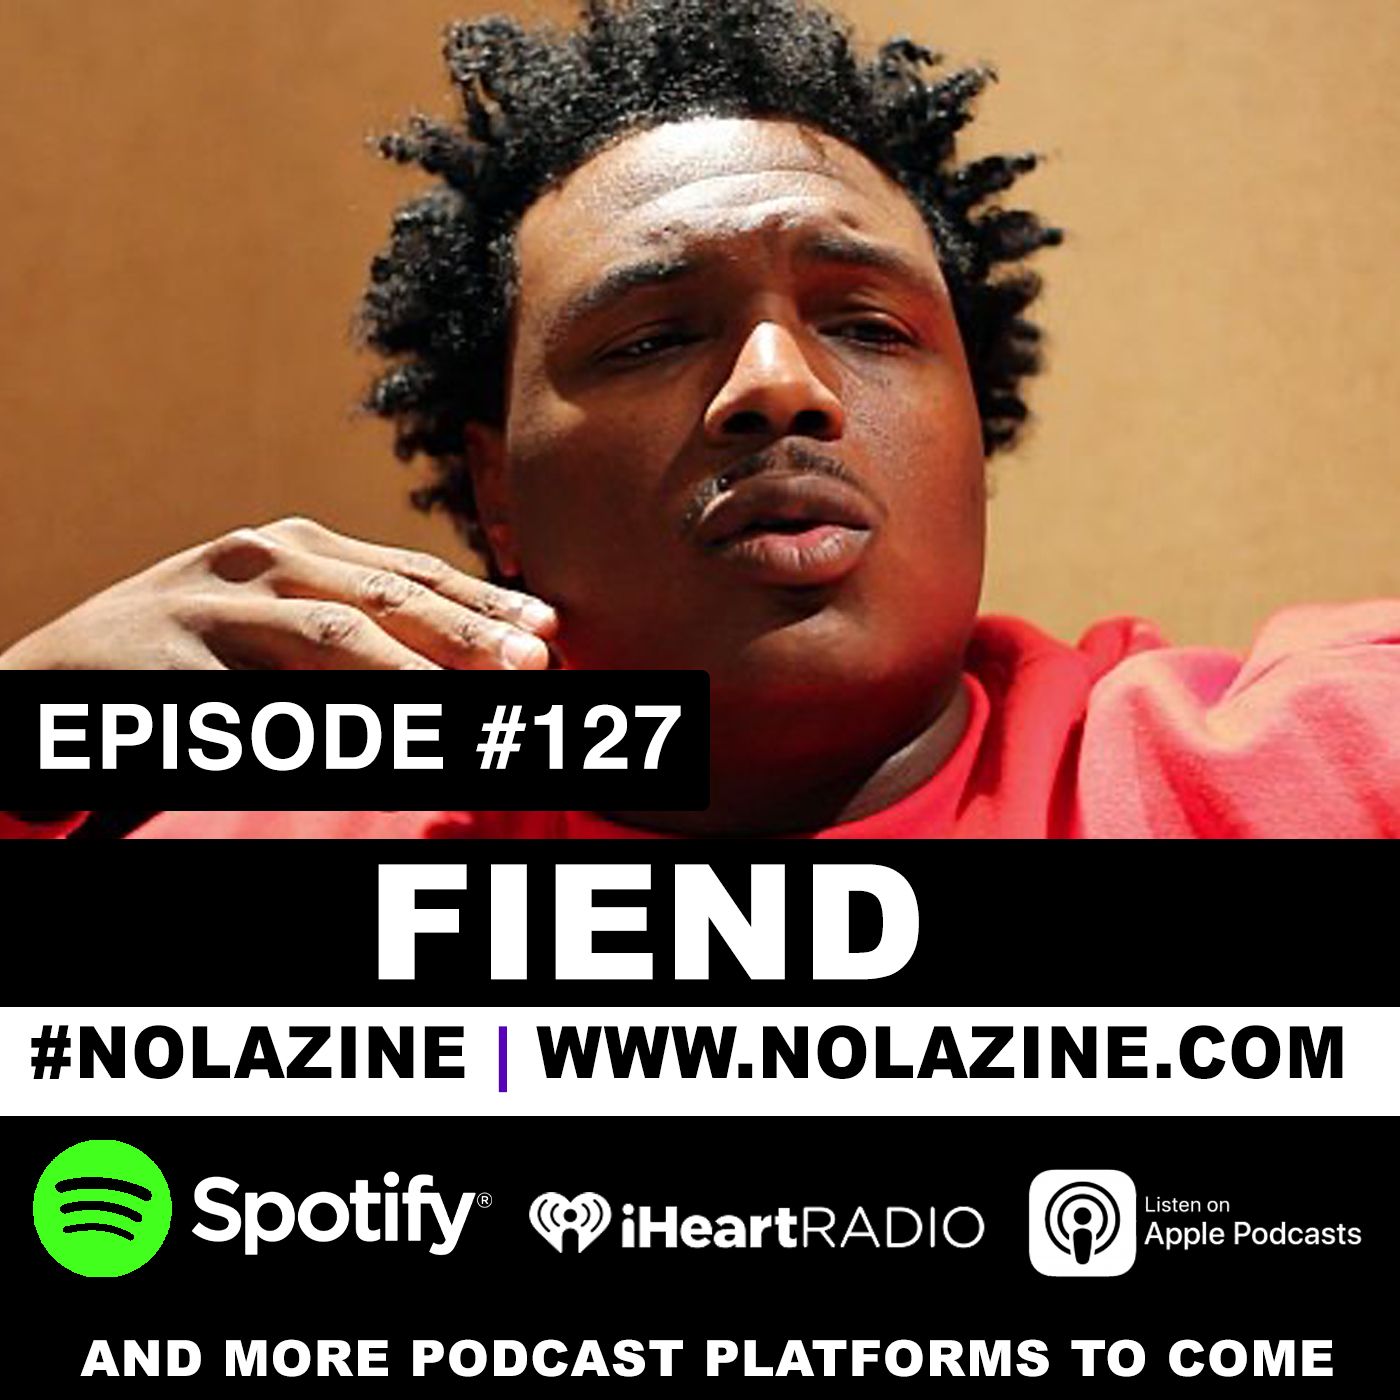 EP: 127 Featuring Fiend